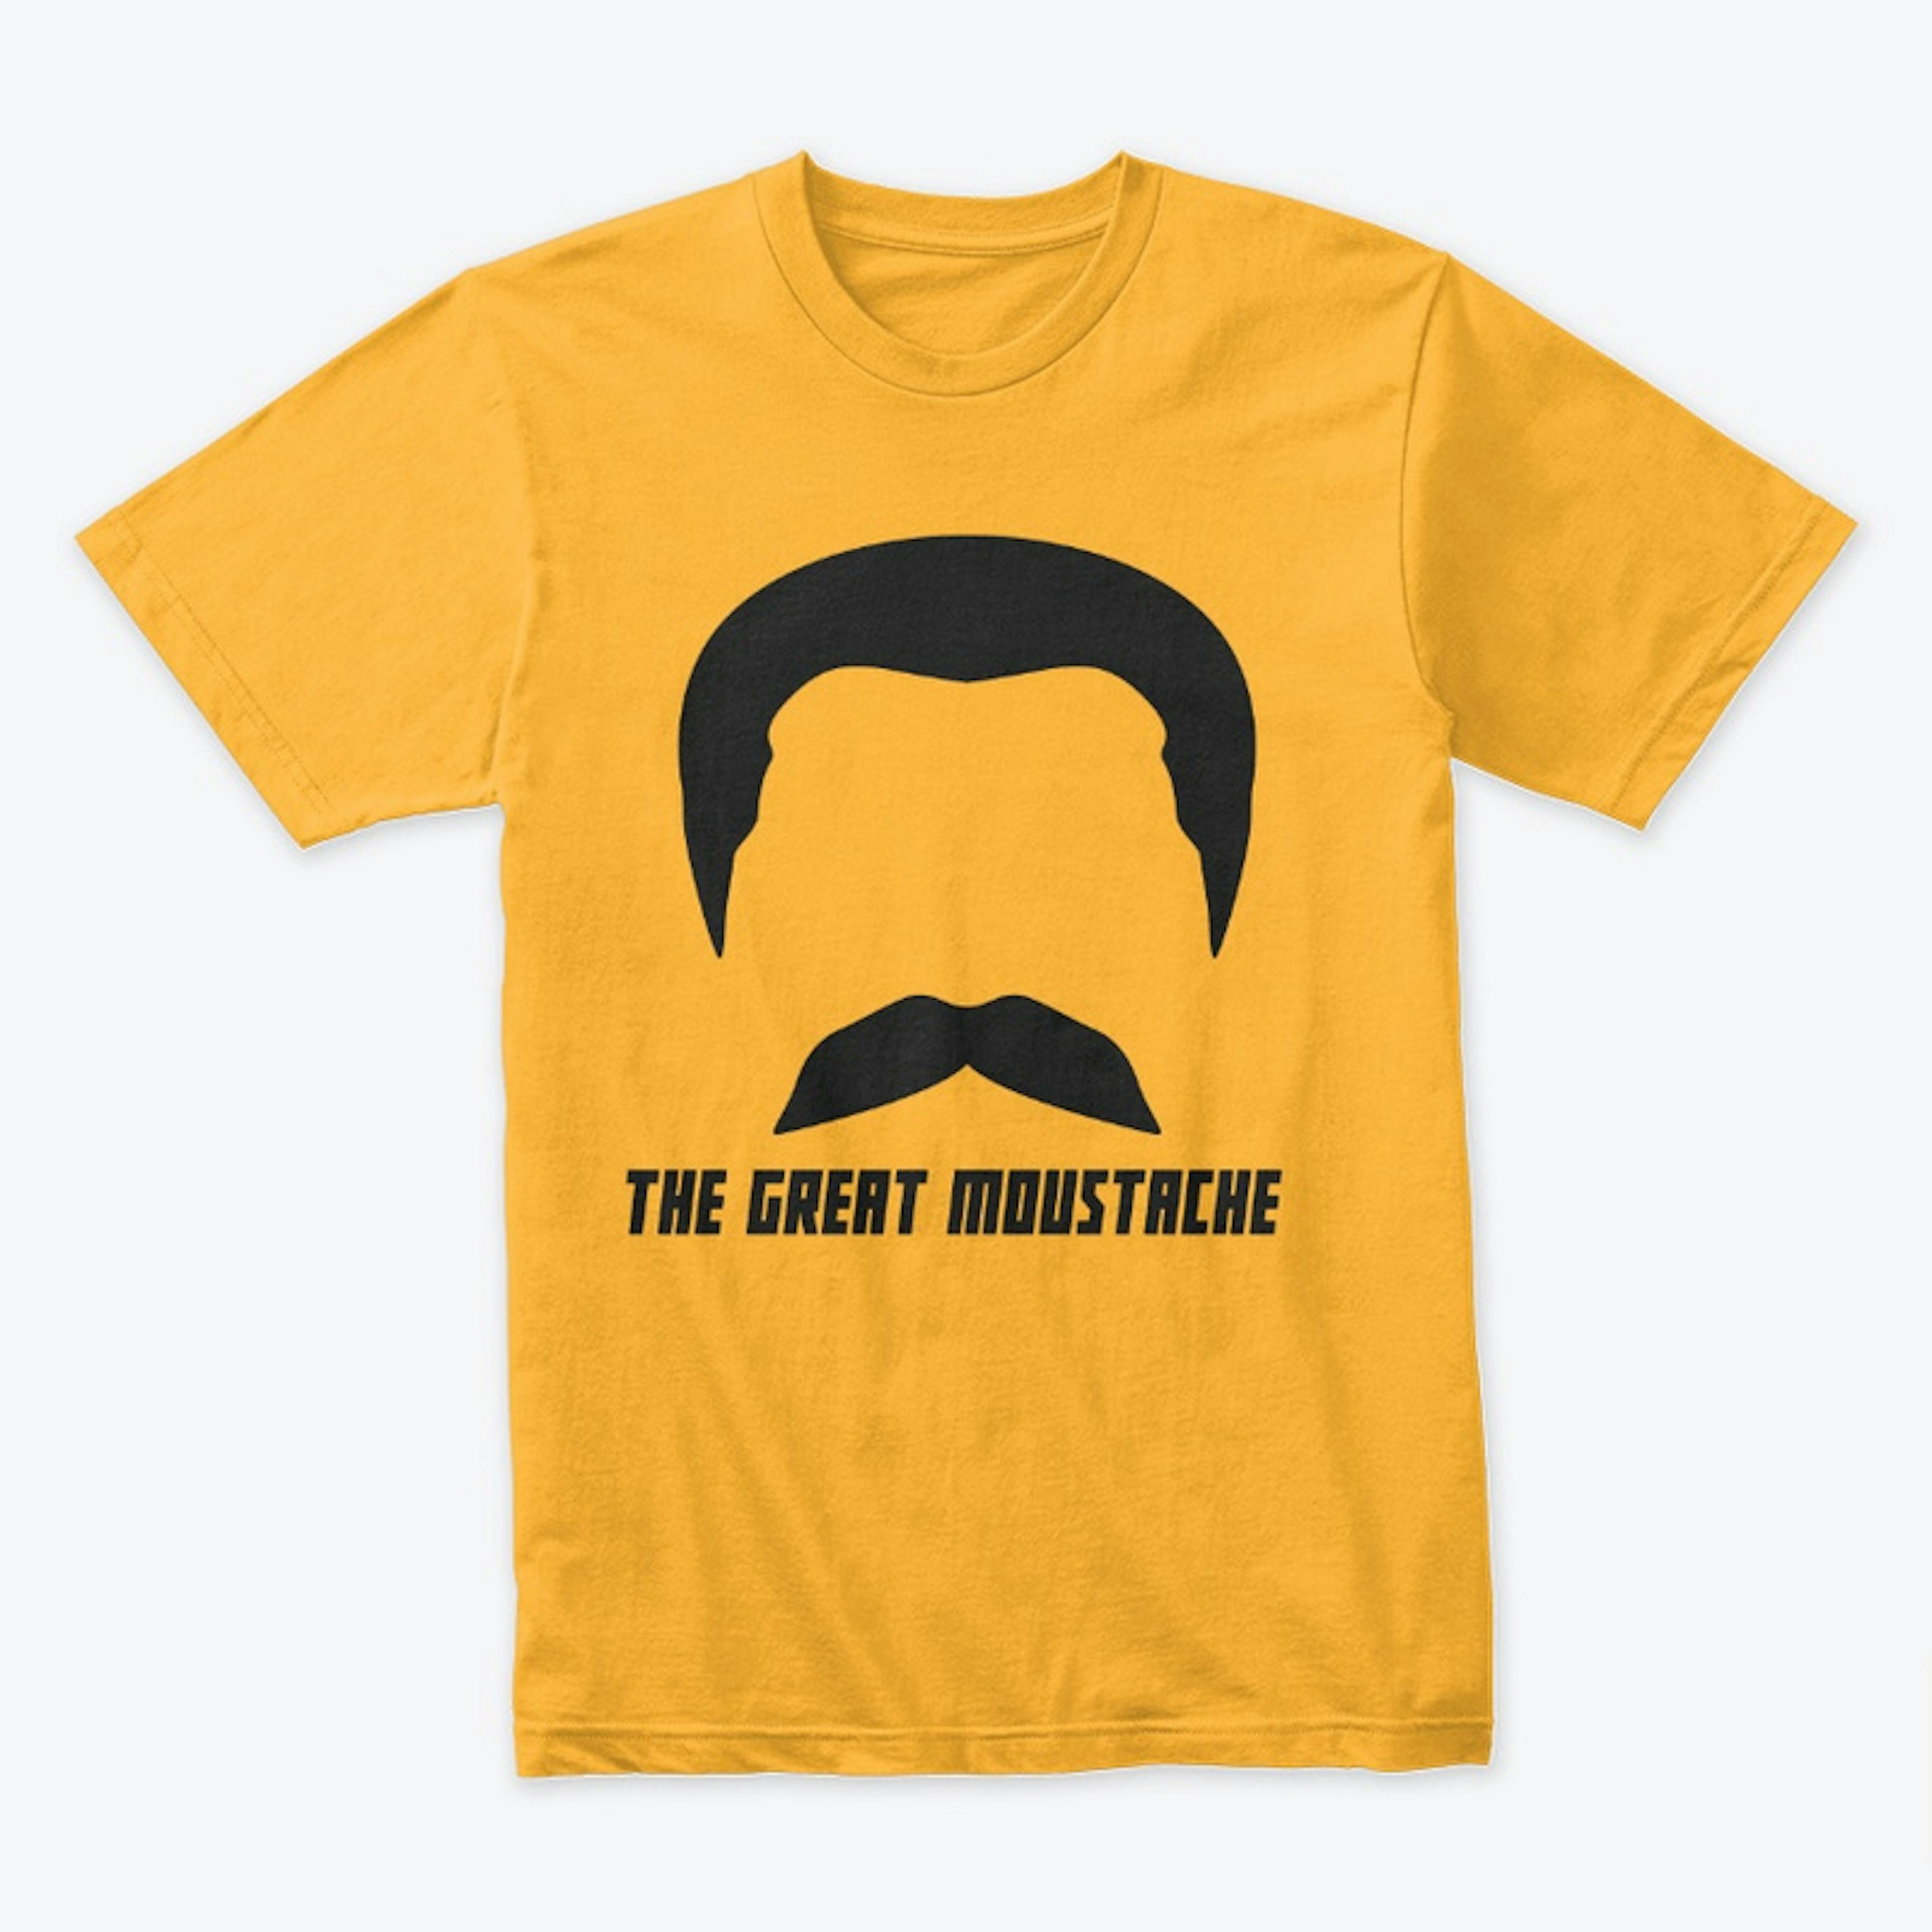 The Great Moustache